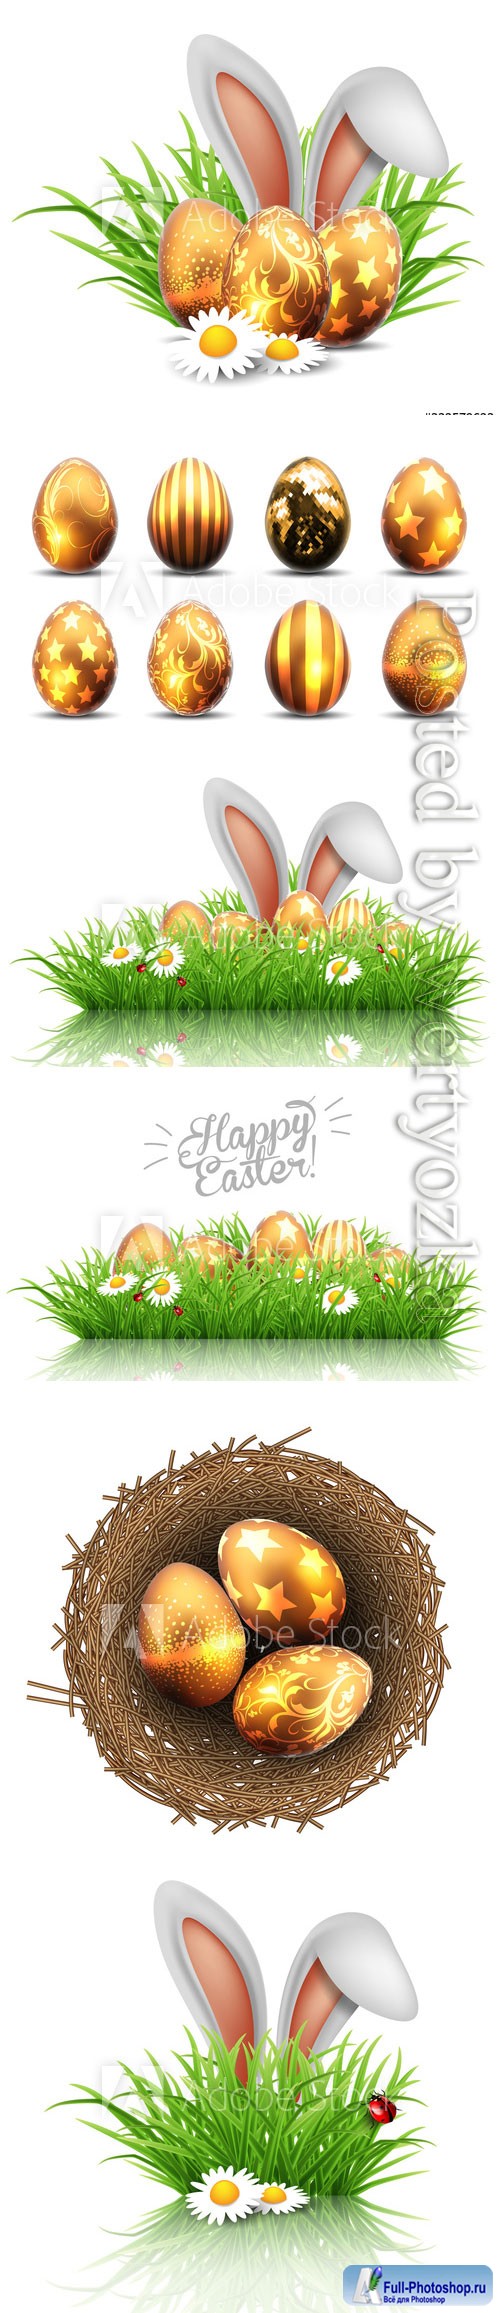 Happy Easter greeting card, rabbit ears peeping out of grass with daisies